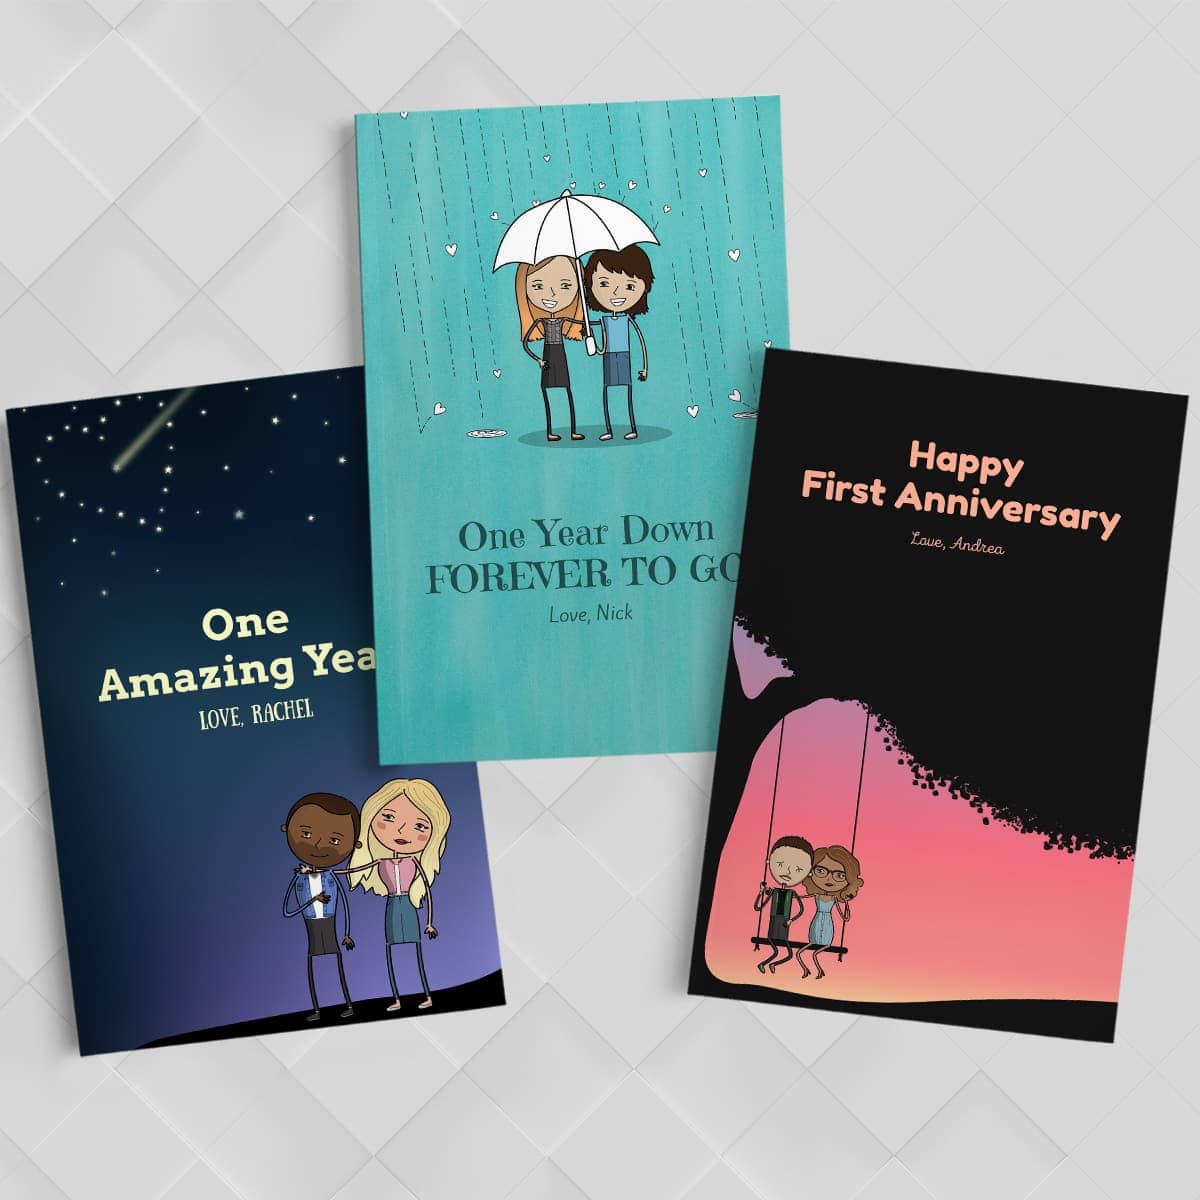 First Anniversary Gifts | LoveBook - 1